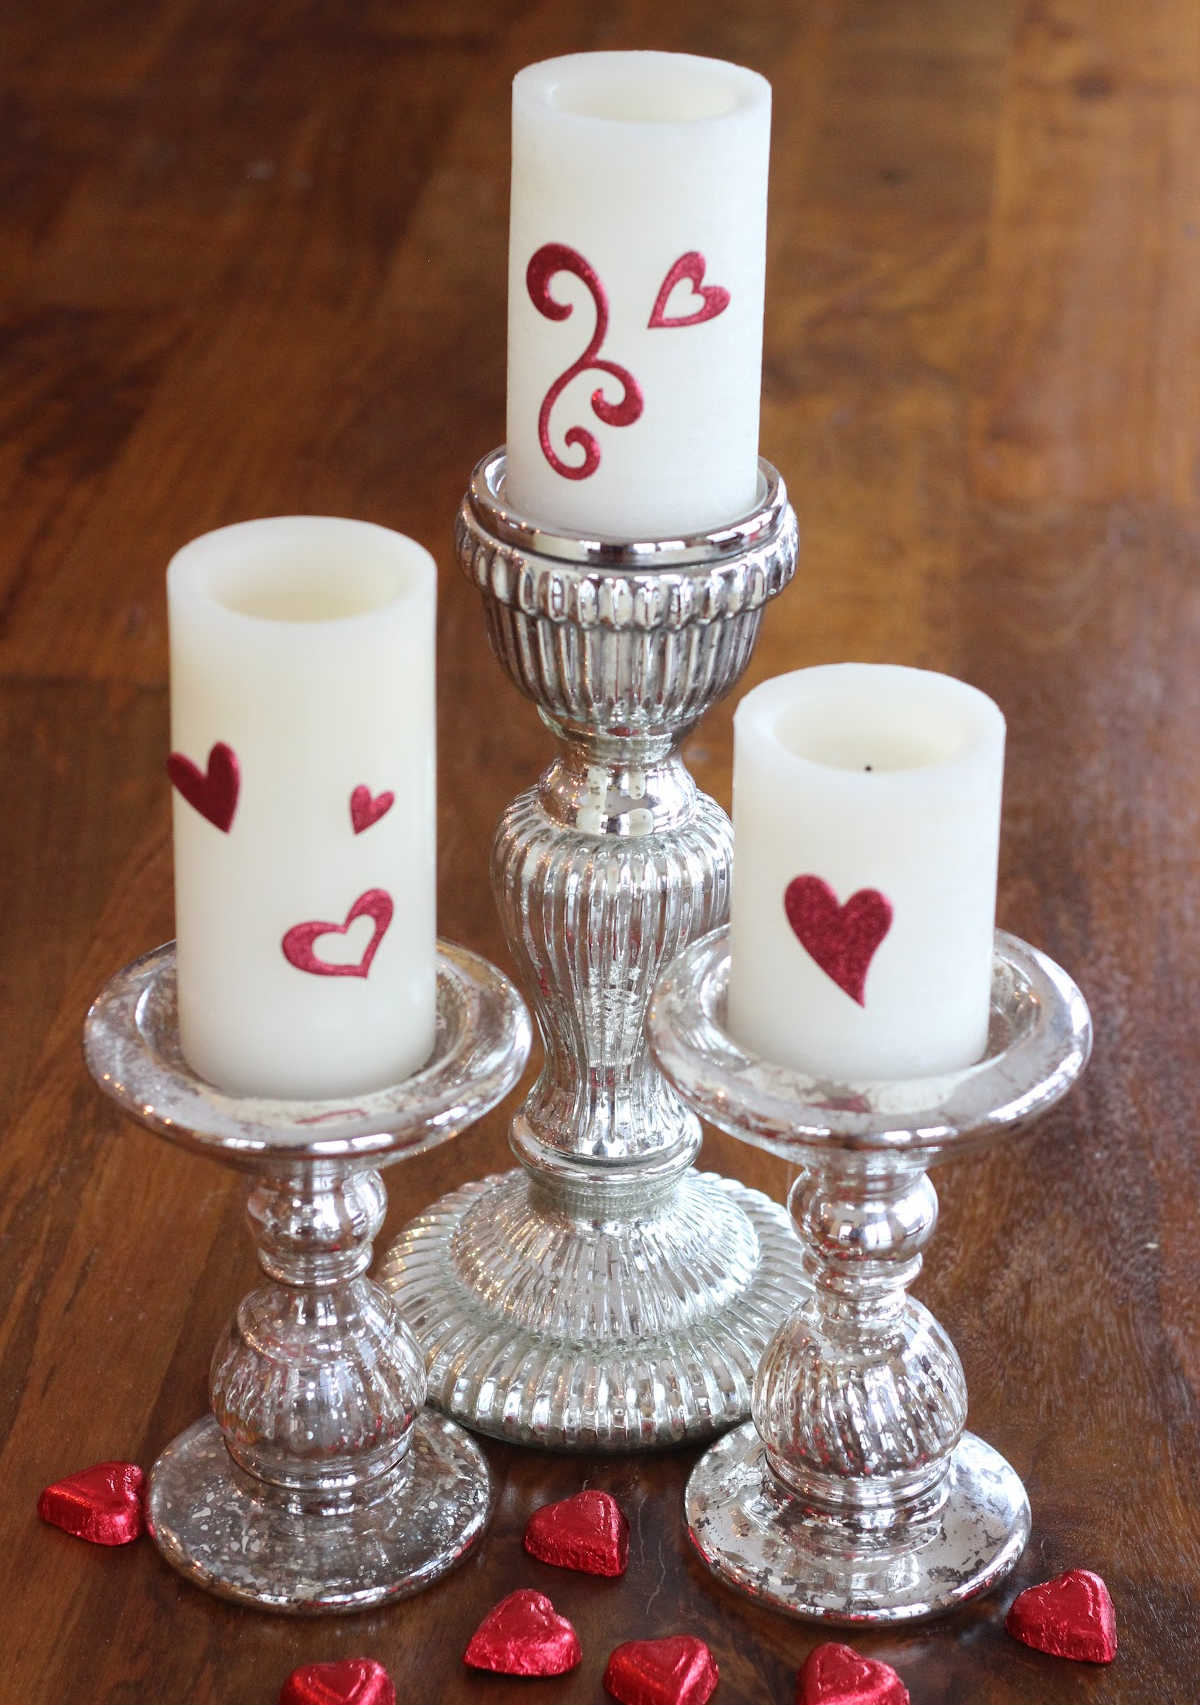 White candles with red heart stickers on them for Valentine's Day decor.